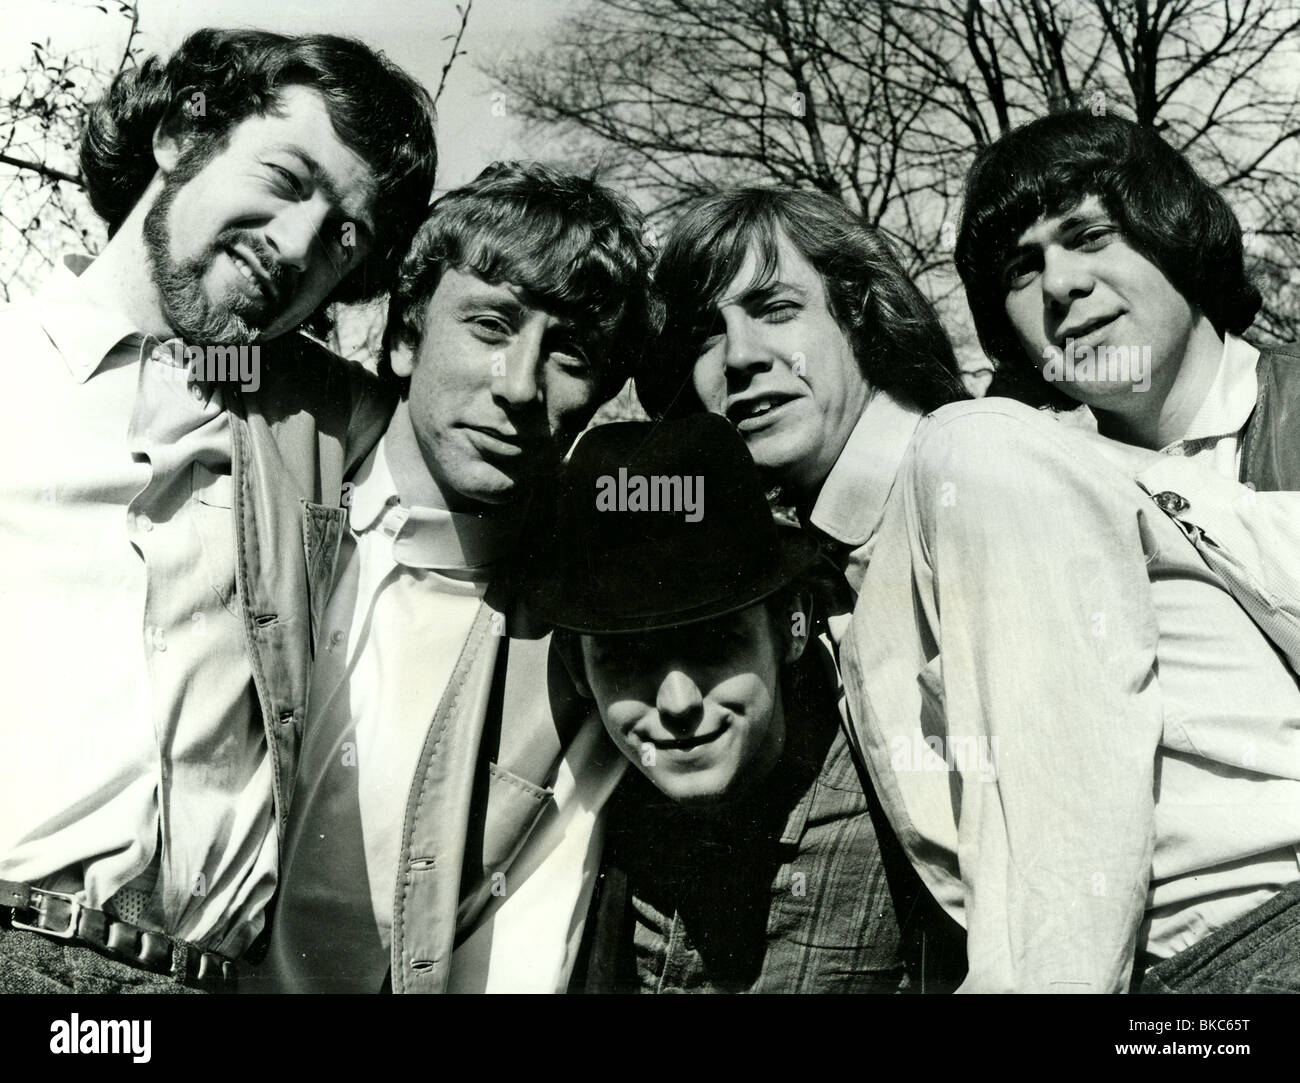 HOLA SOY EXTRATERRESTRE, ME ENSEÑAS ? - Página 28 The-pretty-things-uk-rock-group-in-1964-from-l-dick-taylorbrian-pendelton-BKC65T